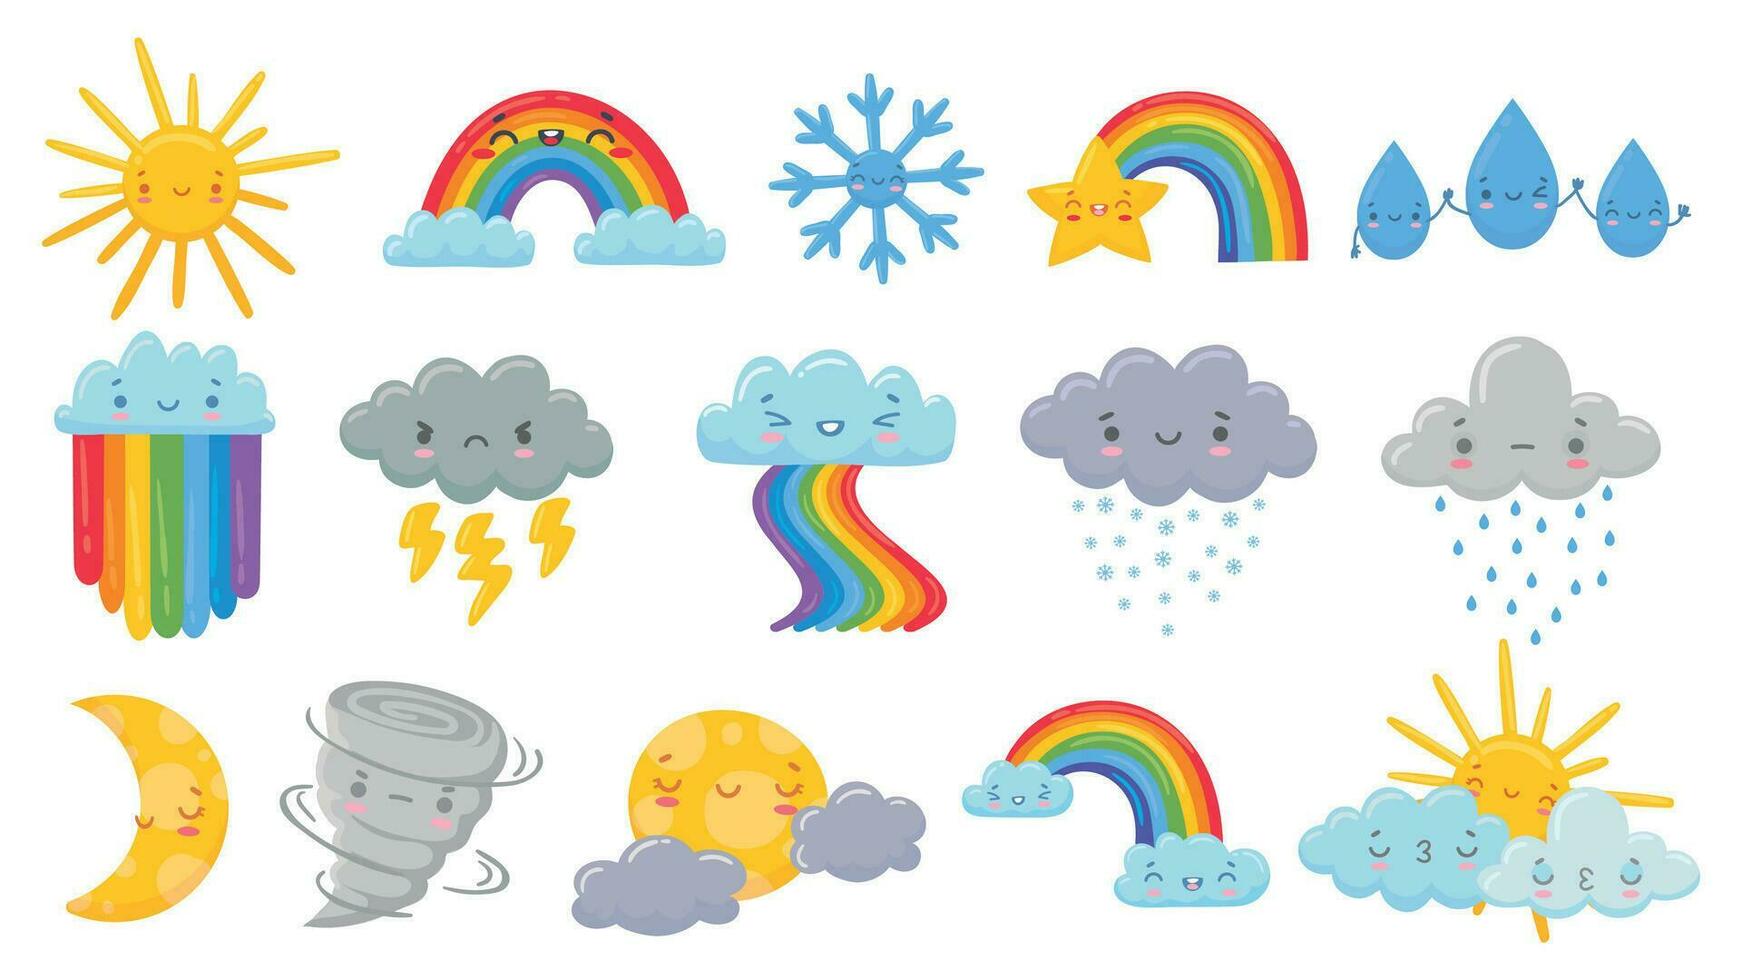 Cute cartoon weather. Happy hot sun, rainbow over clouds and funny snowflake. Snowly and rainy cloud, sleeping moon and angry hurricane vector illustration set